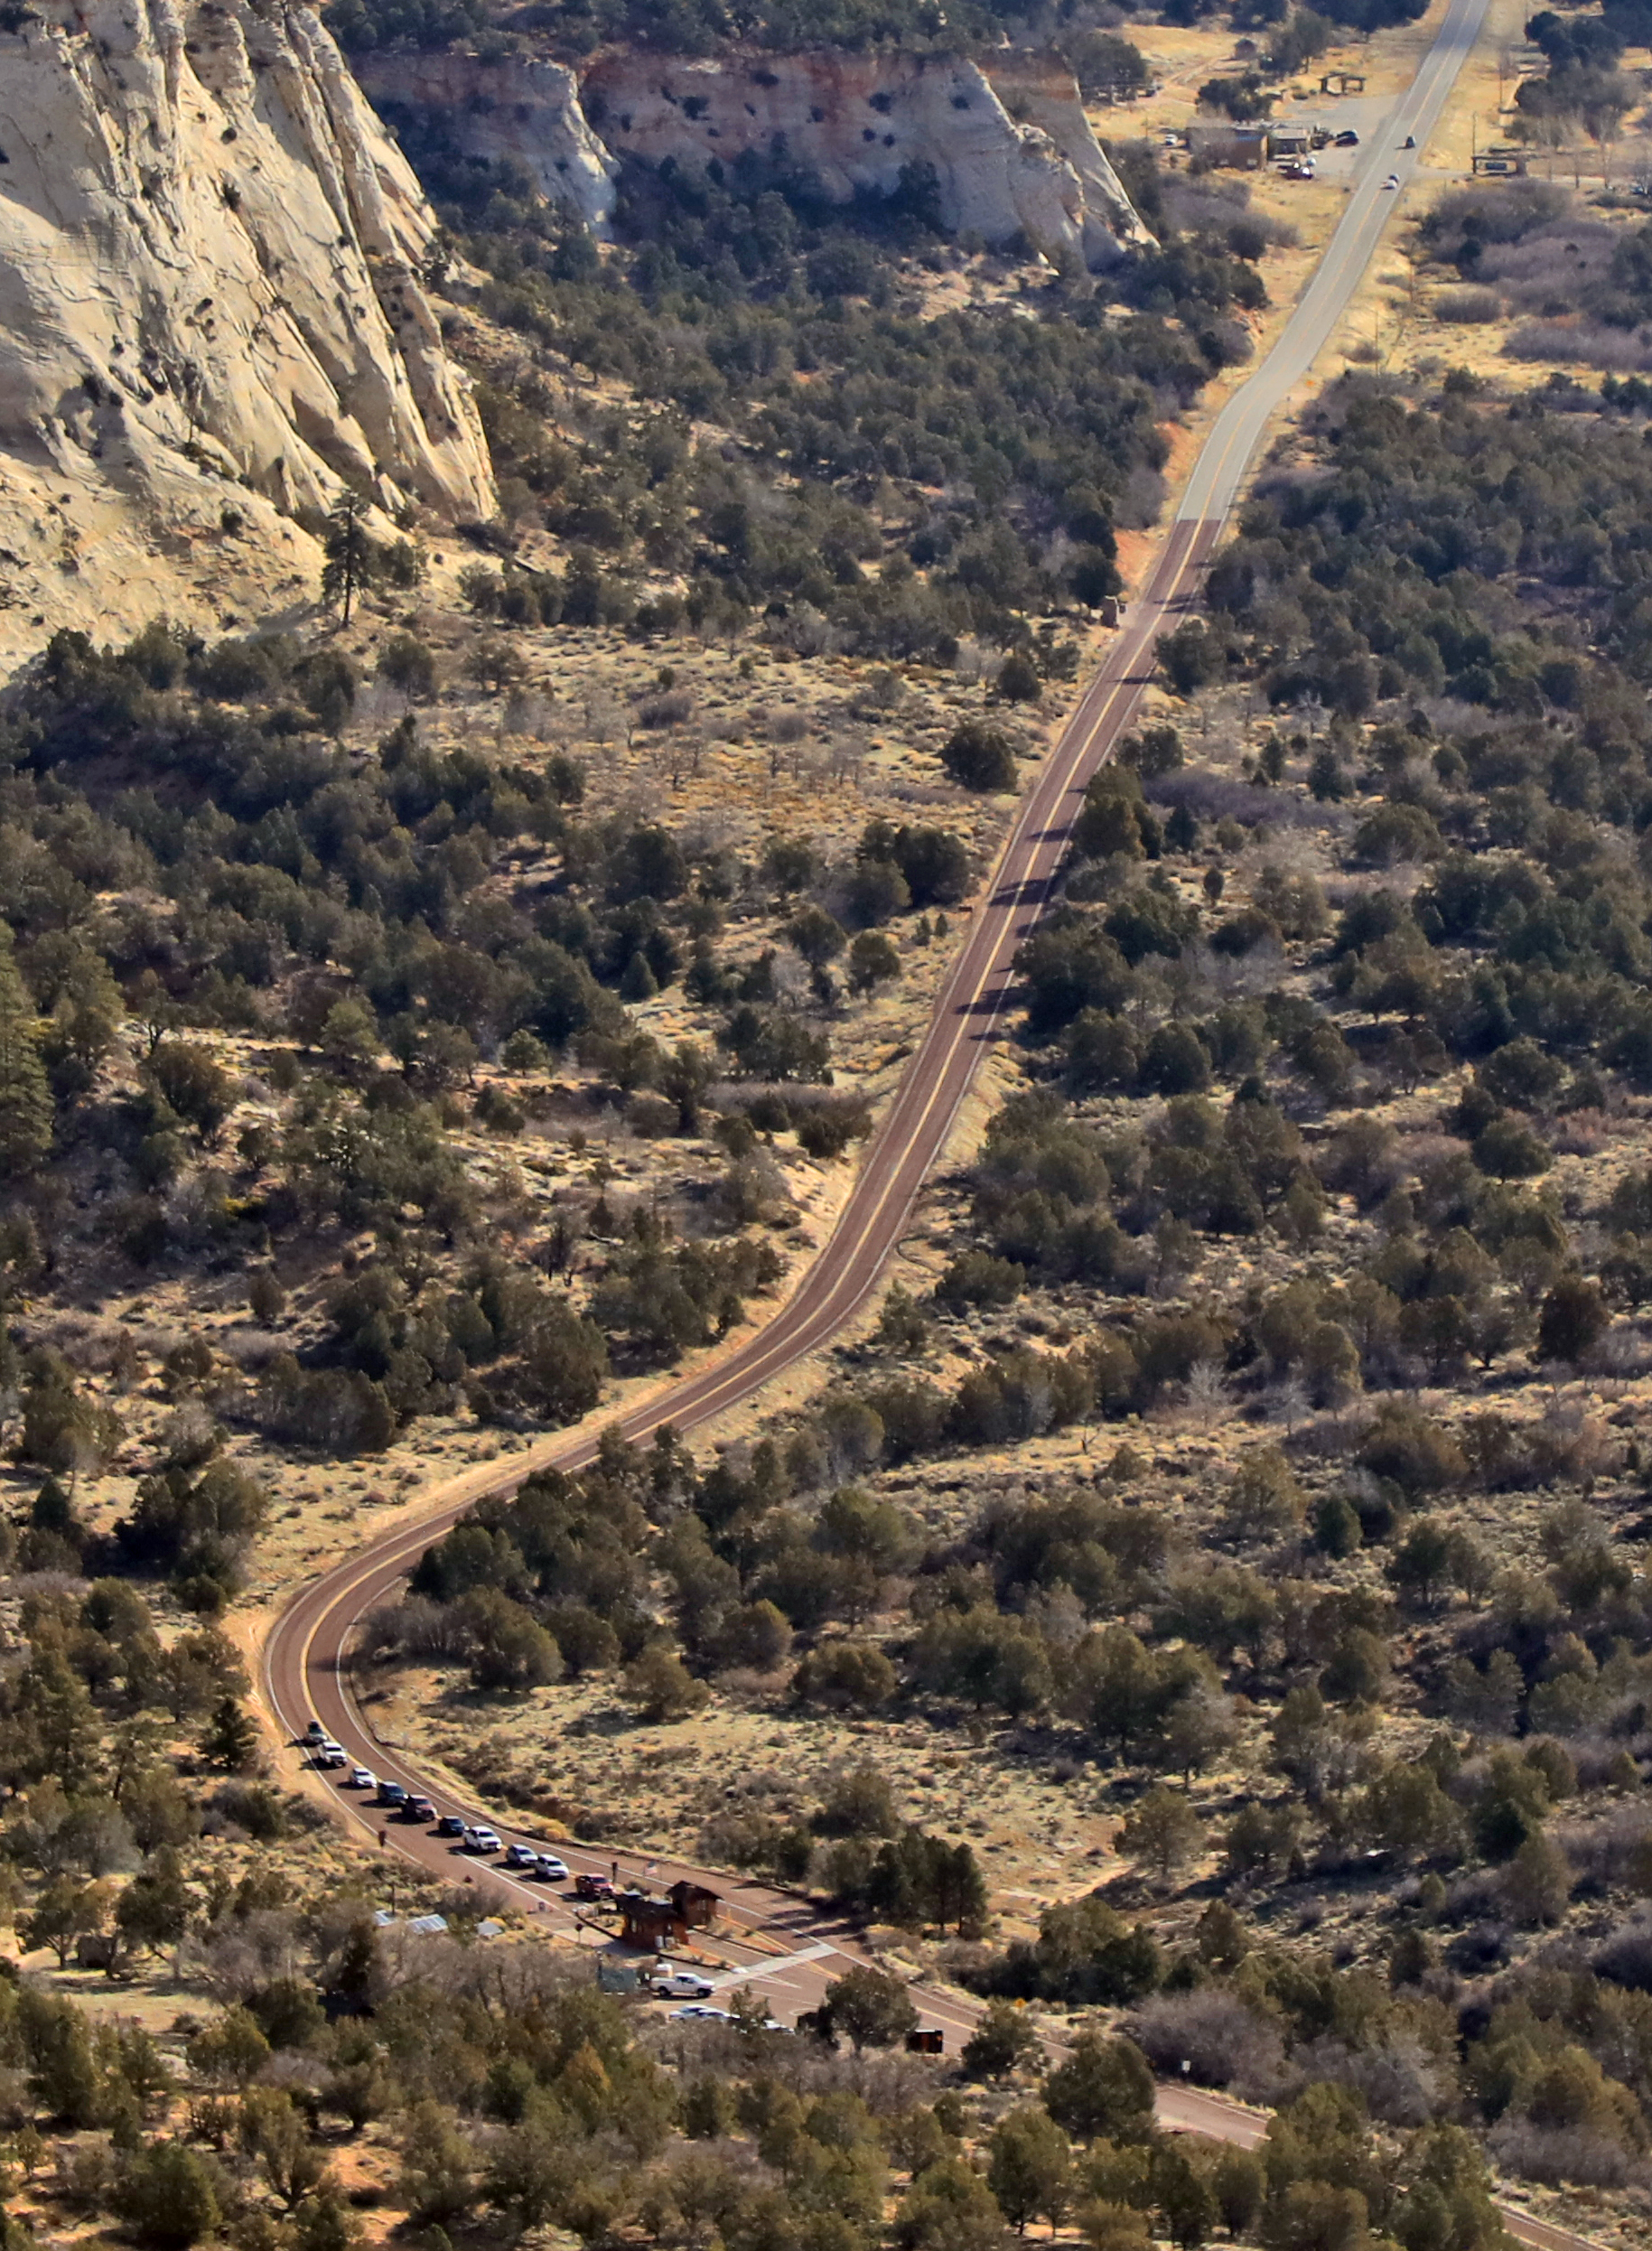 Aerial view of the road leading into the trees and rock features at the East entrance of Zion National Park